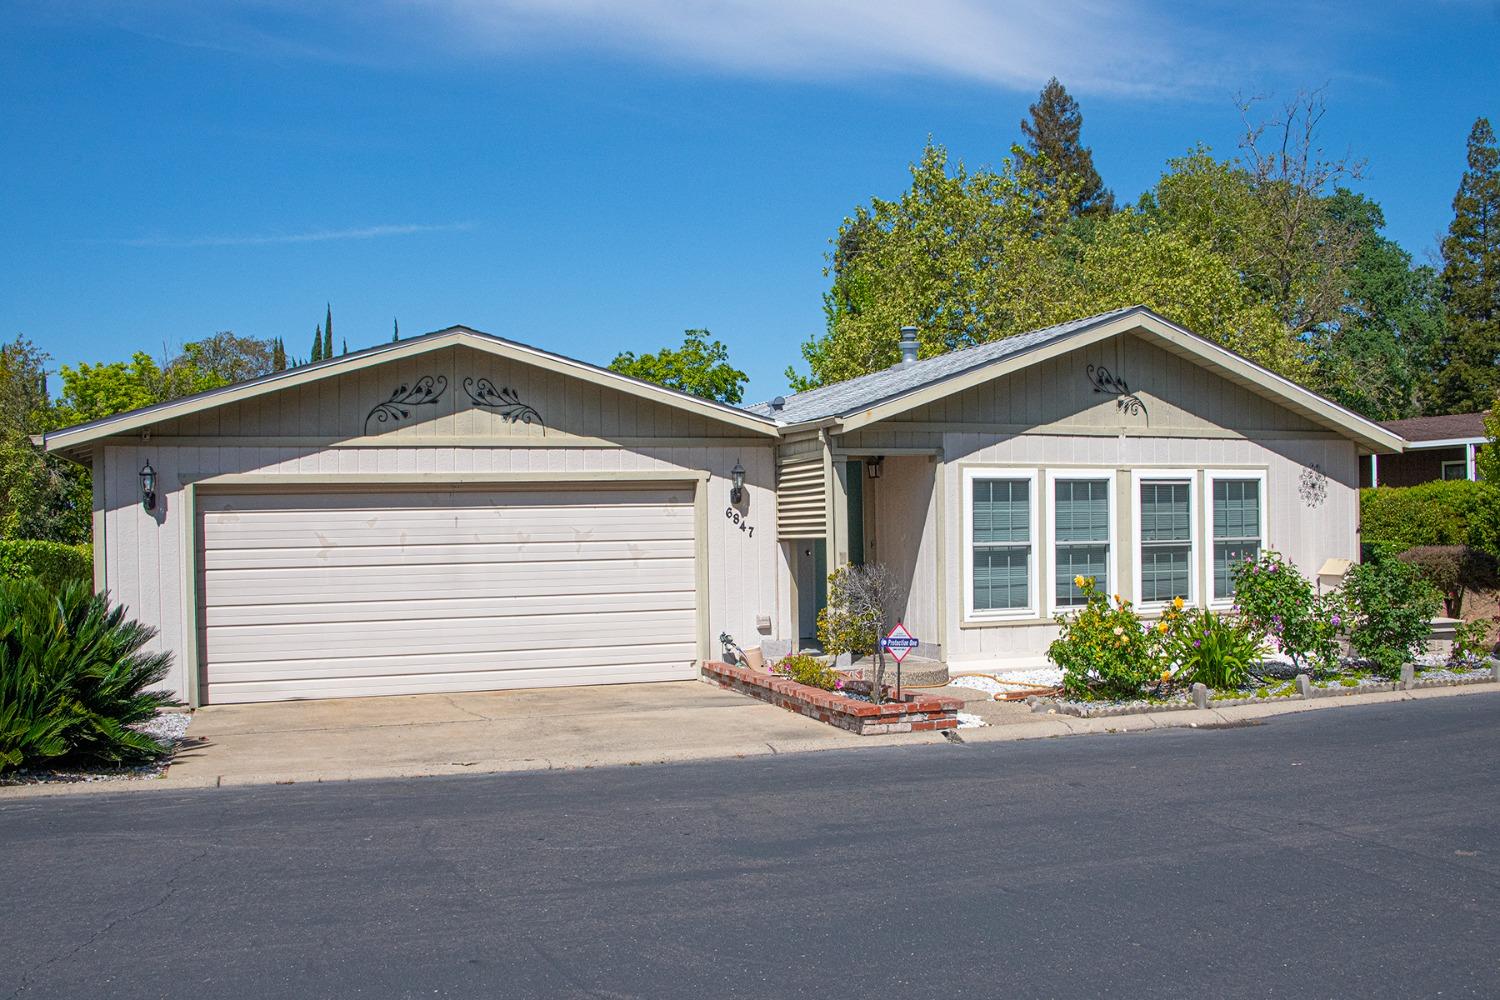 Photo of 6847 Tandy Ln in Citrus Heights, CA